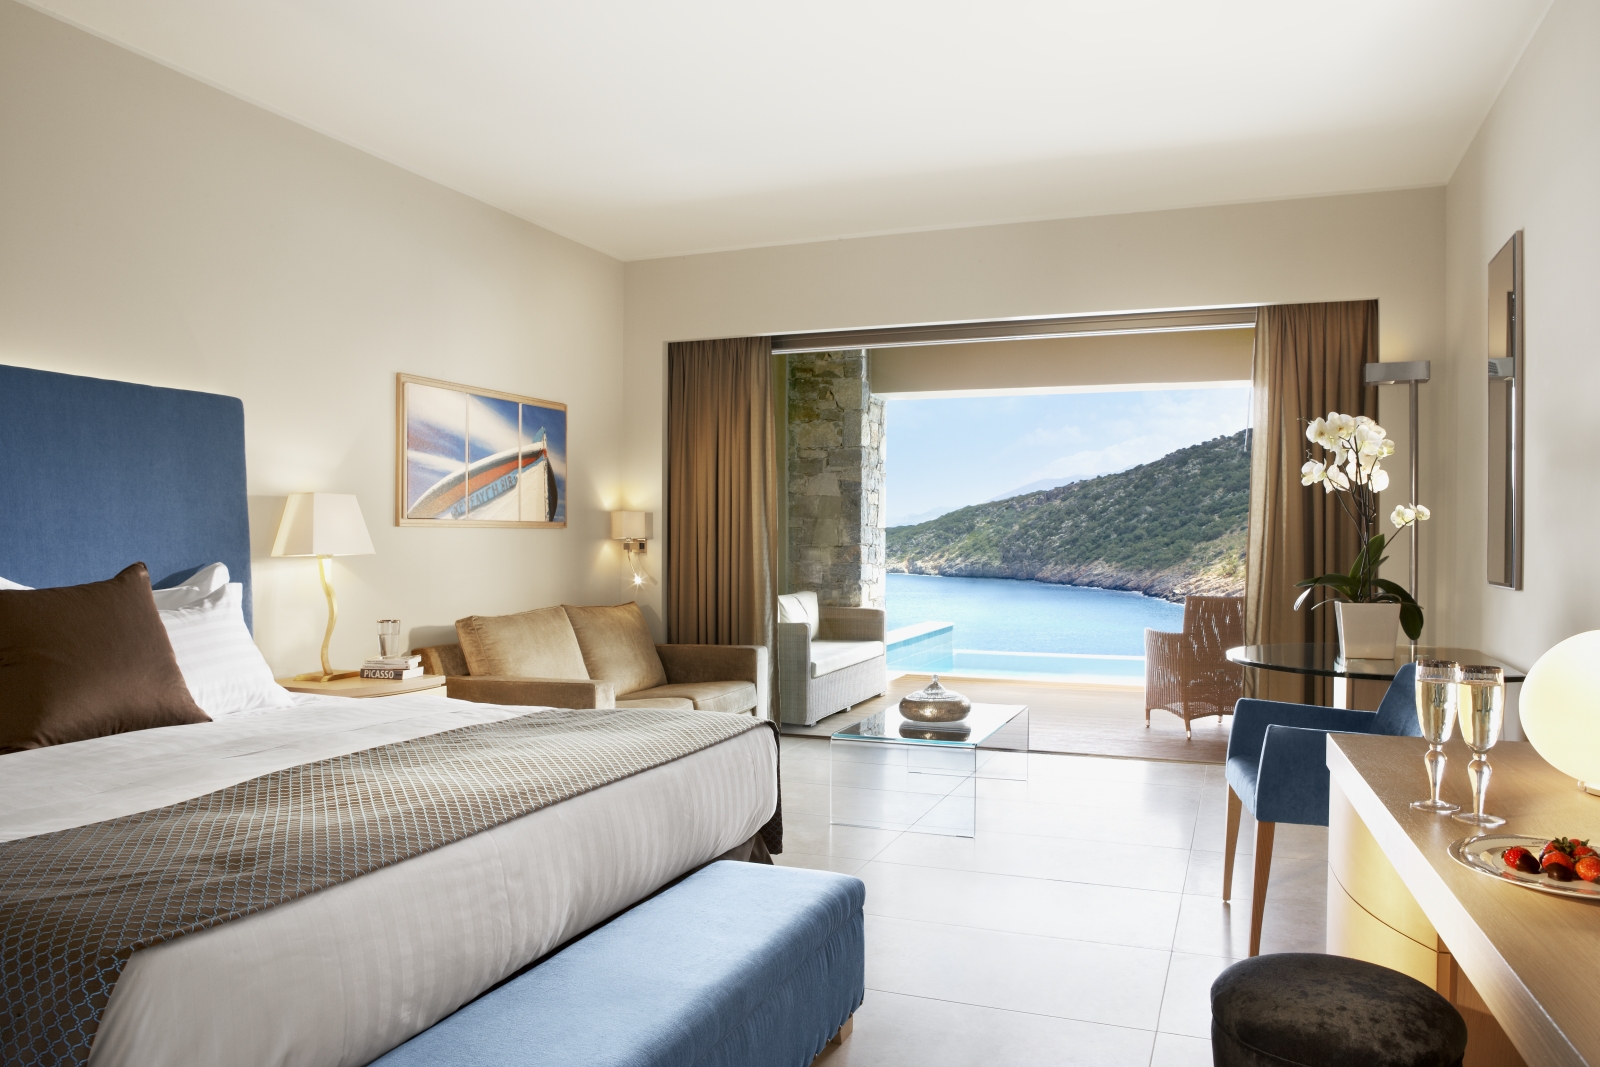 Deluxe Room with private pool and sea view at luxury resort Daios Cove in Greece